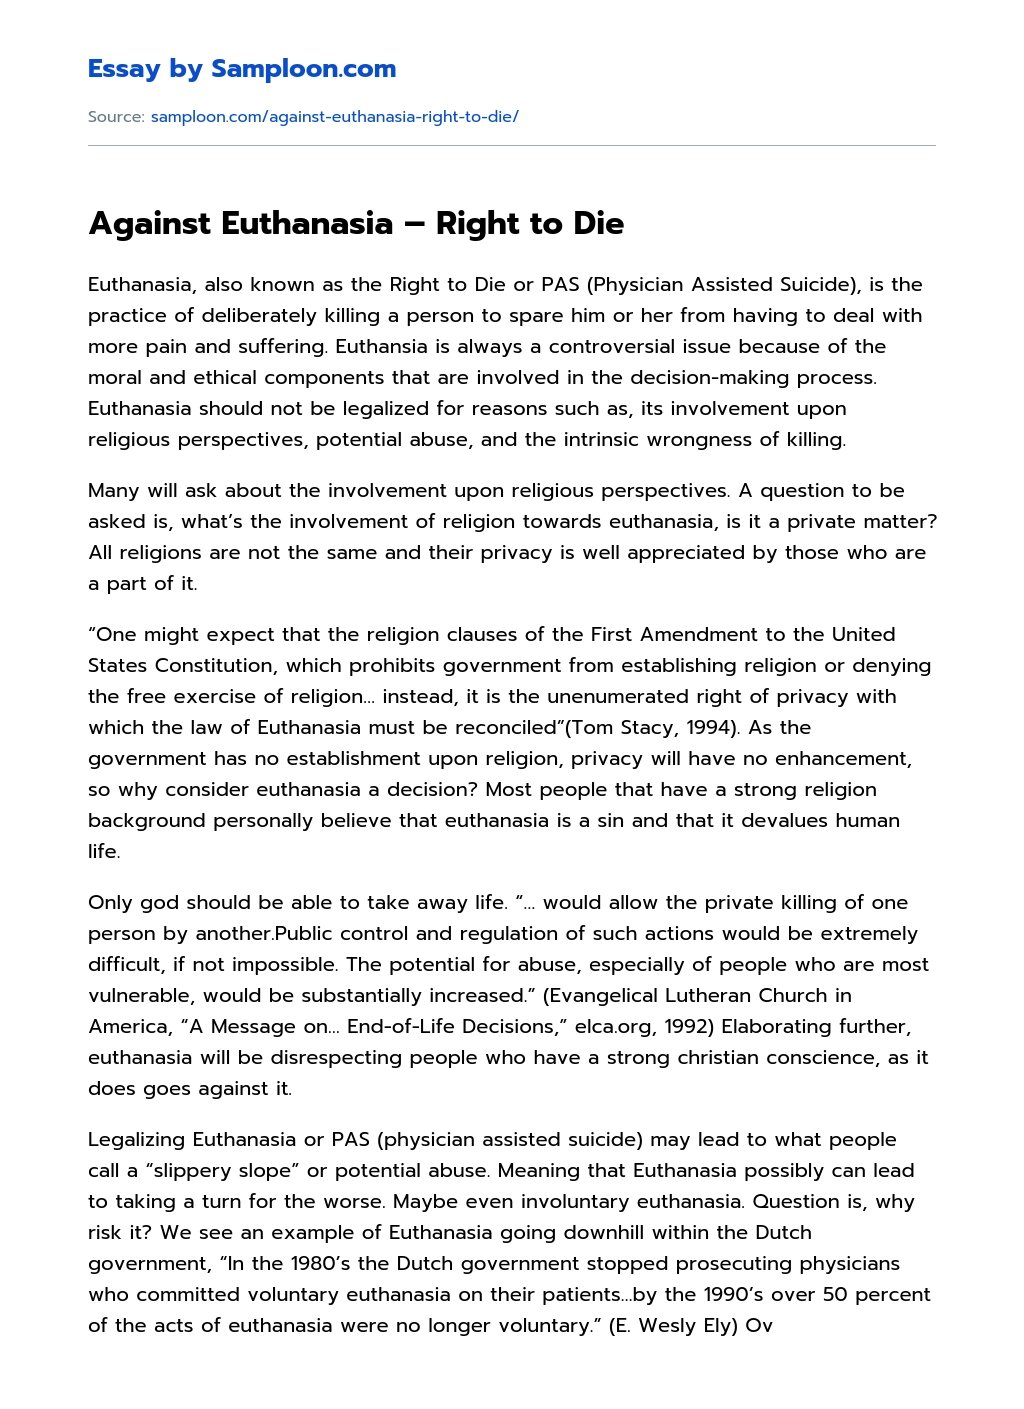 Against Euthanasia – Right to Die essay